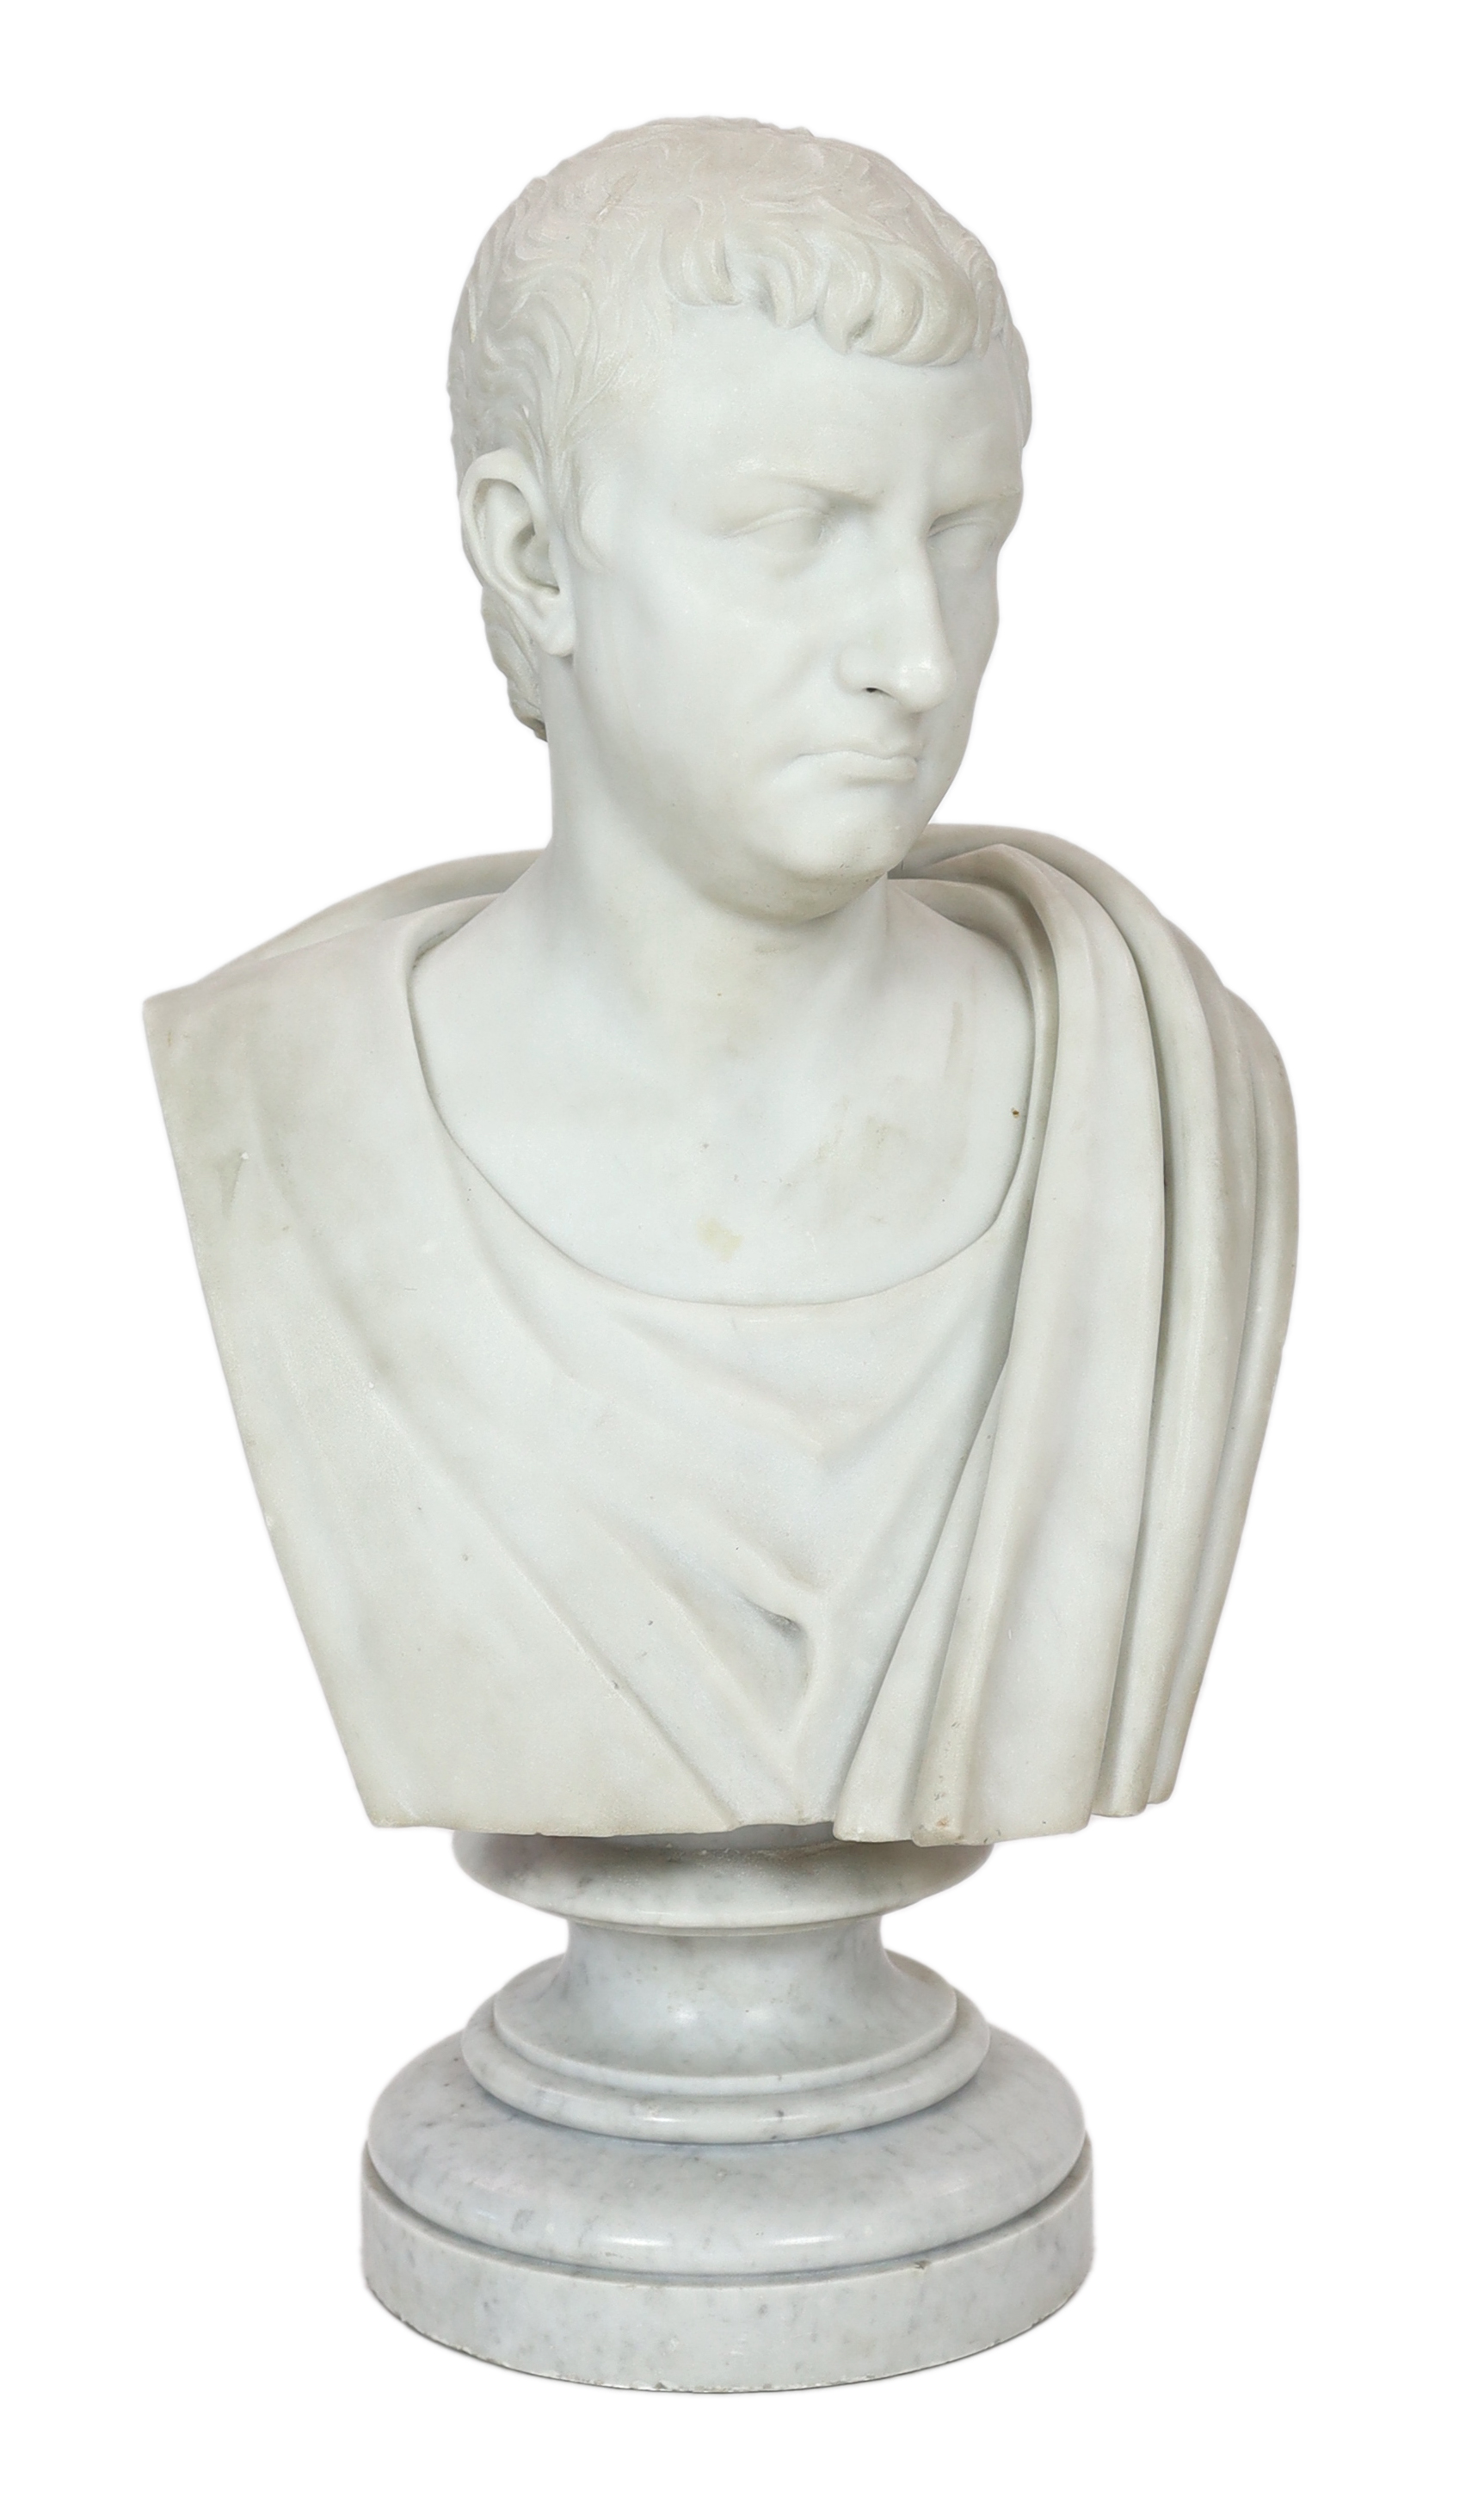 Studio of Orazio Andreioni (c.1840-1895), a 19th century Italian white marble bust of a Roman Emperor, possibly Tiberius, 41cm wide, 30cm deep, overall 75cm high, Please note this lot attracts an additional import tax of